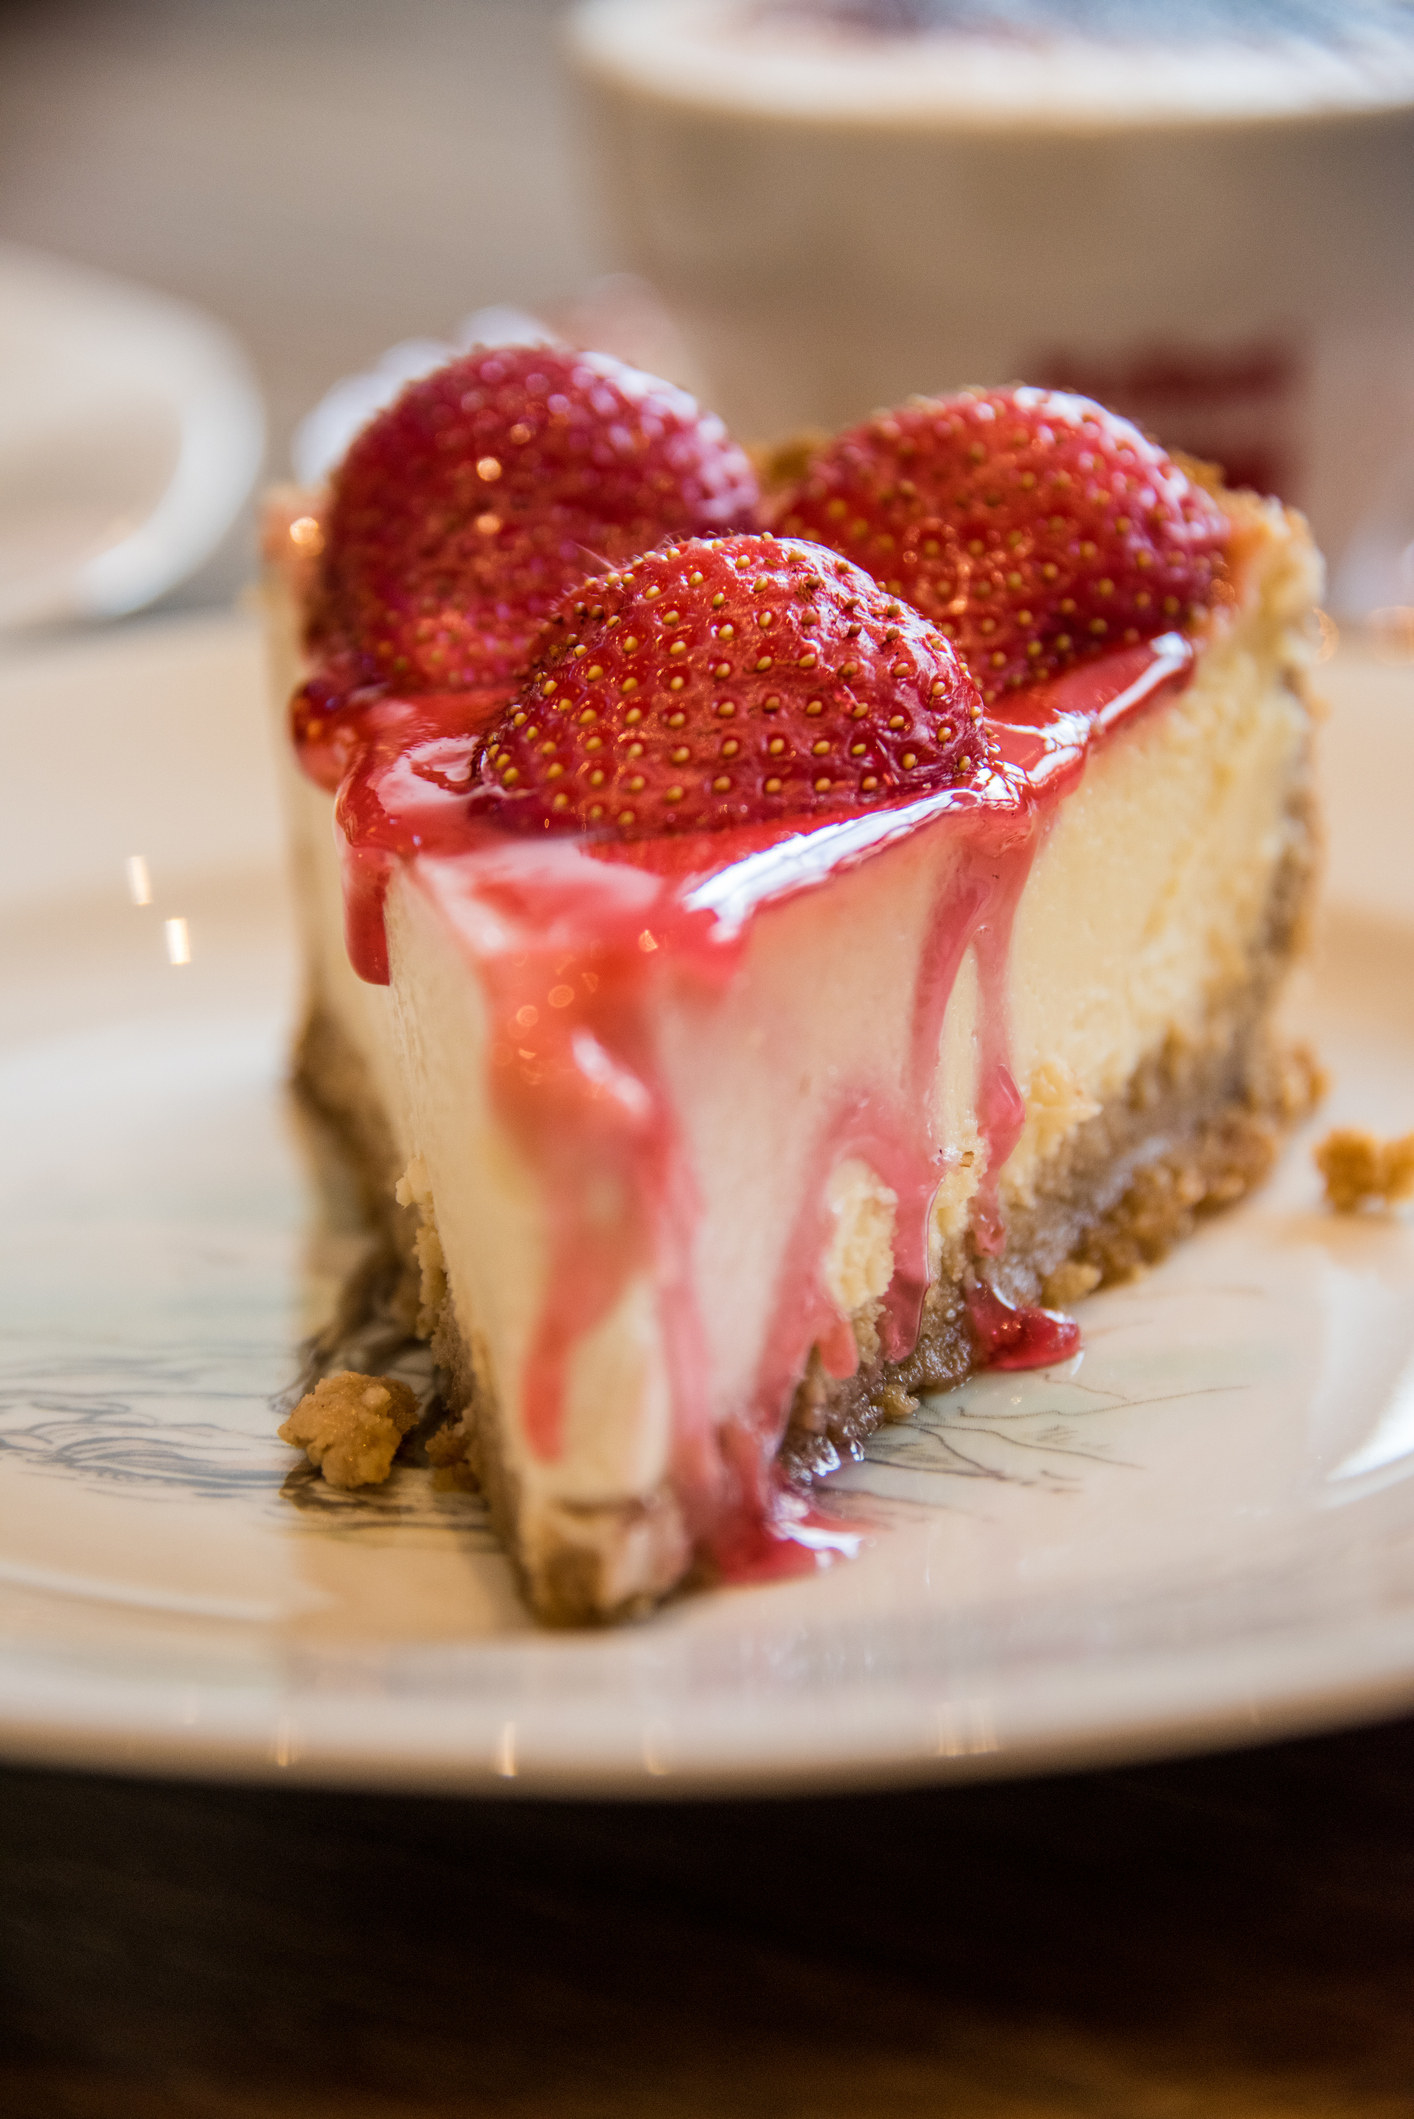 A slice of strawberry cheesecake.